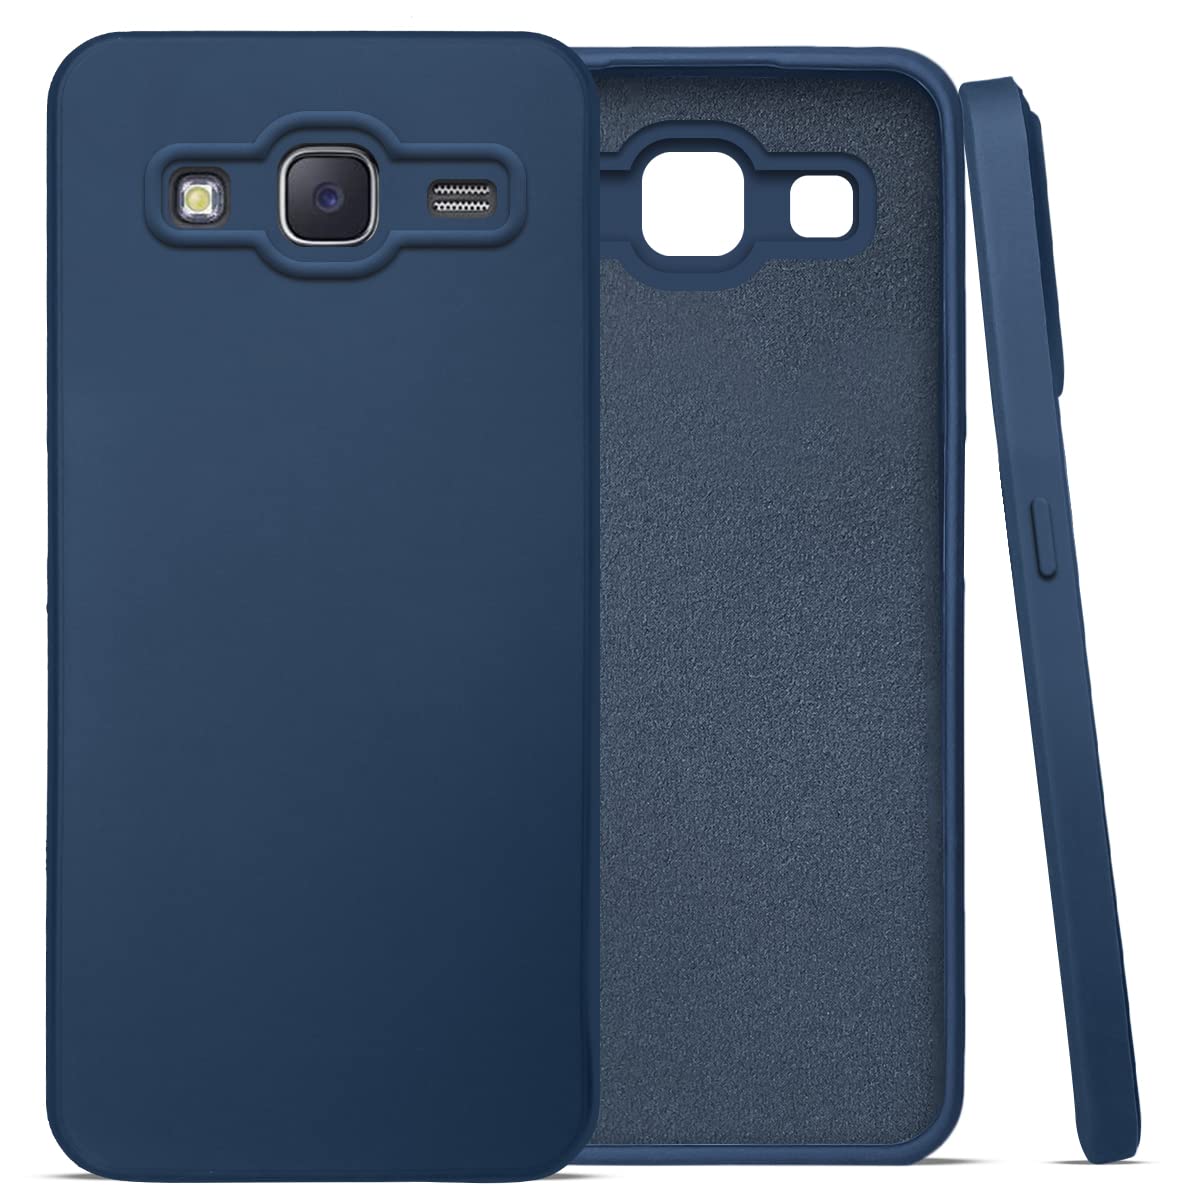 Samsung Galaxy J7 Silicone + Cloth inner side Back cover